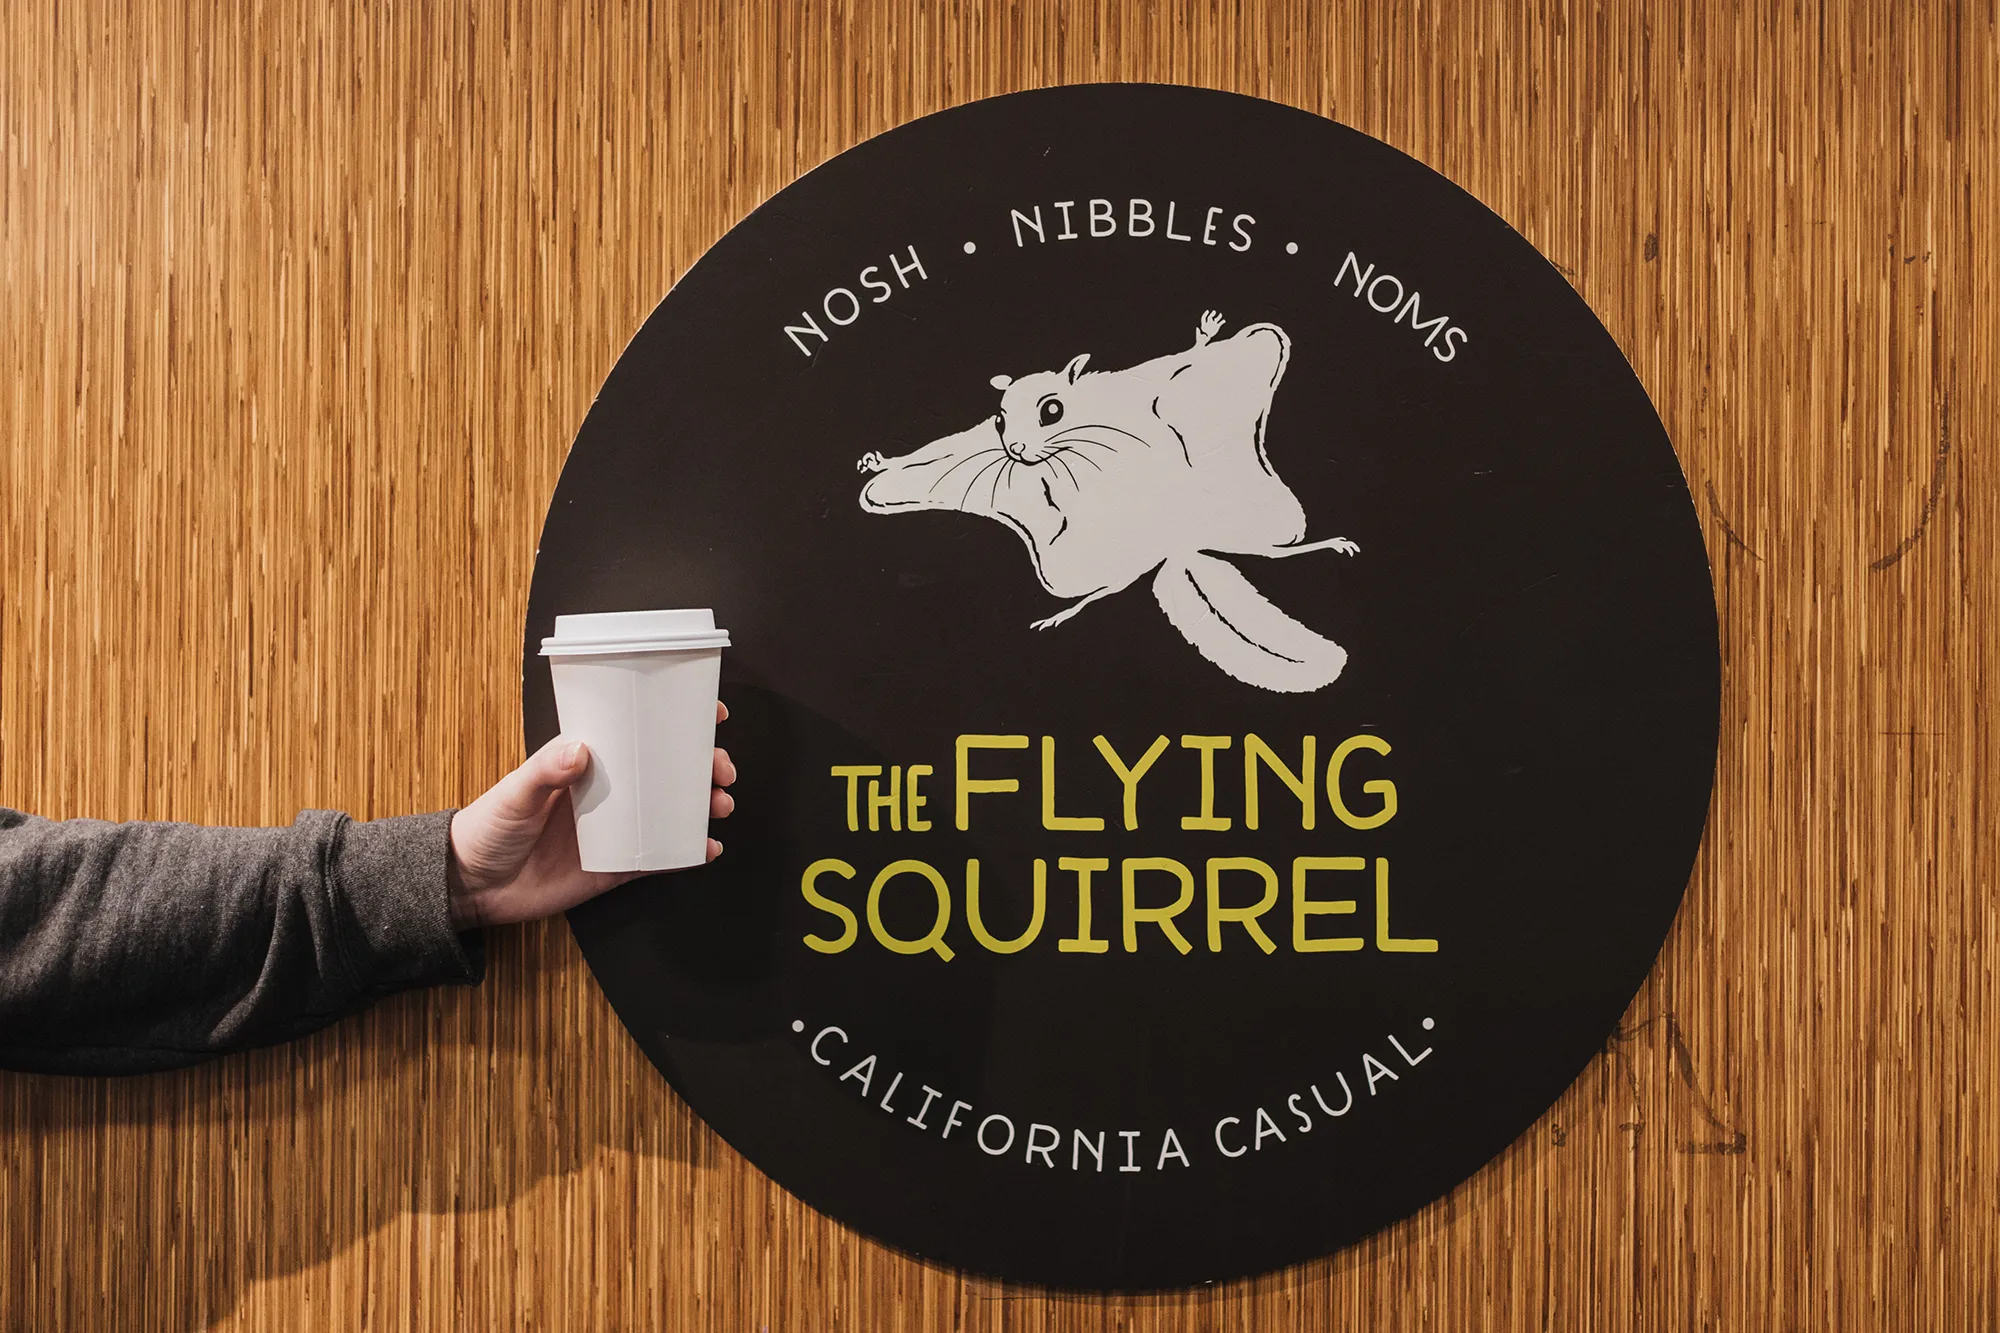 A person holding a disposable coffee cup with lid in front of the Flying Squirrel Cafe logo. The logo depicts a flying squirrel with the words Nosh, Nibbles, Noms, the Flying Squirrel, California Casual.